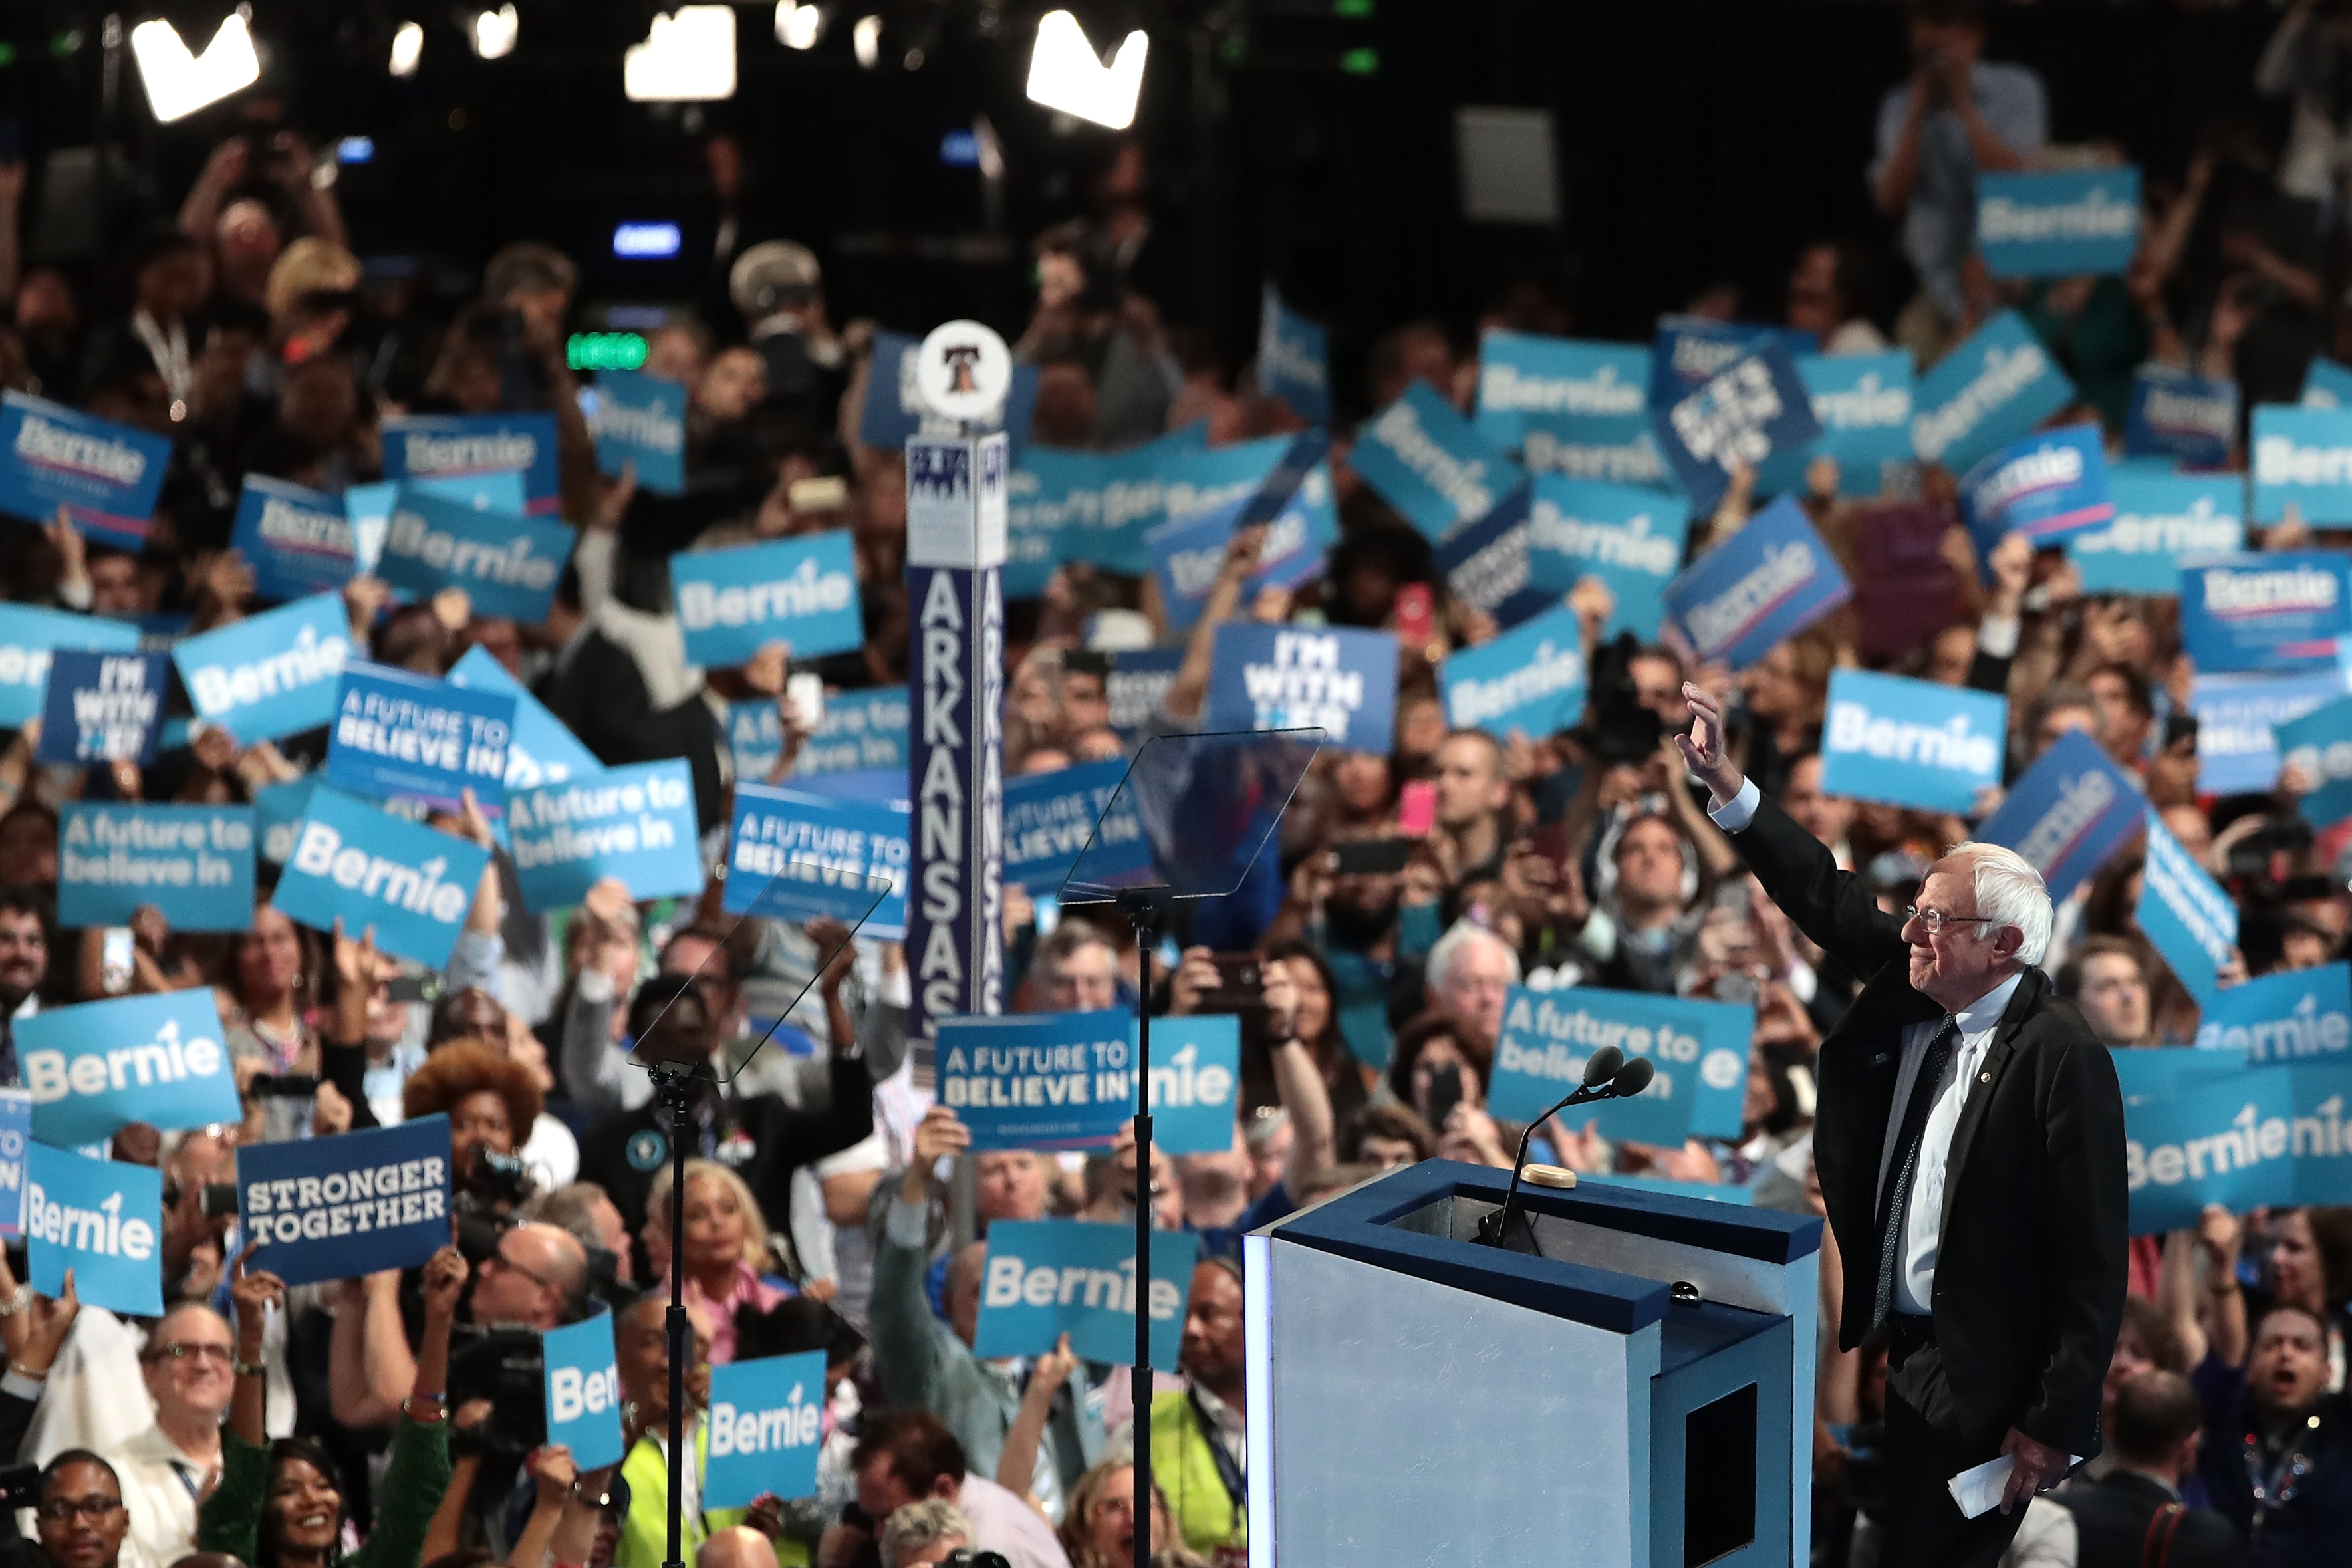 Sen. Bernie Sanders delivers remarks at the Democratic National Convention on July 25, 2016. Sanders lost the Democratic nomination to Hillary Clinton, who he urged his supporters to vote for. (Drew Angerer&mdash;Getty Images)